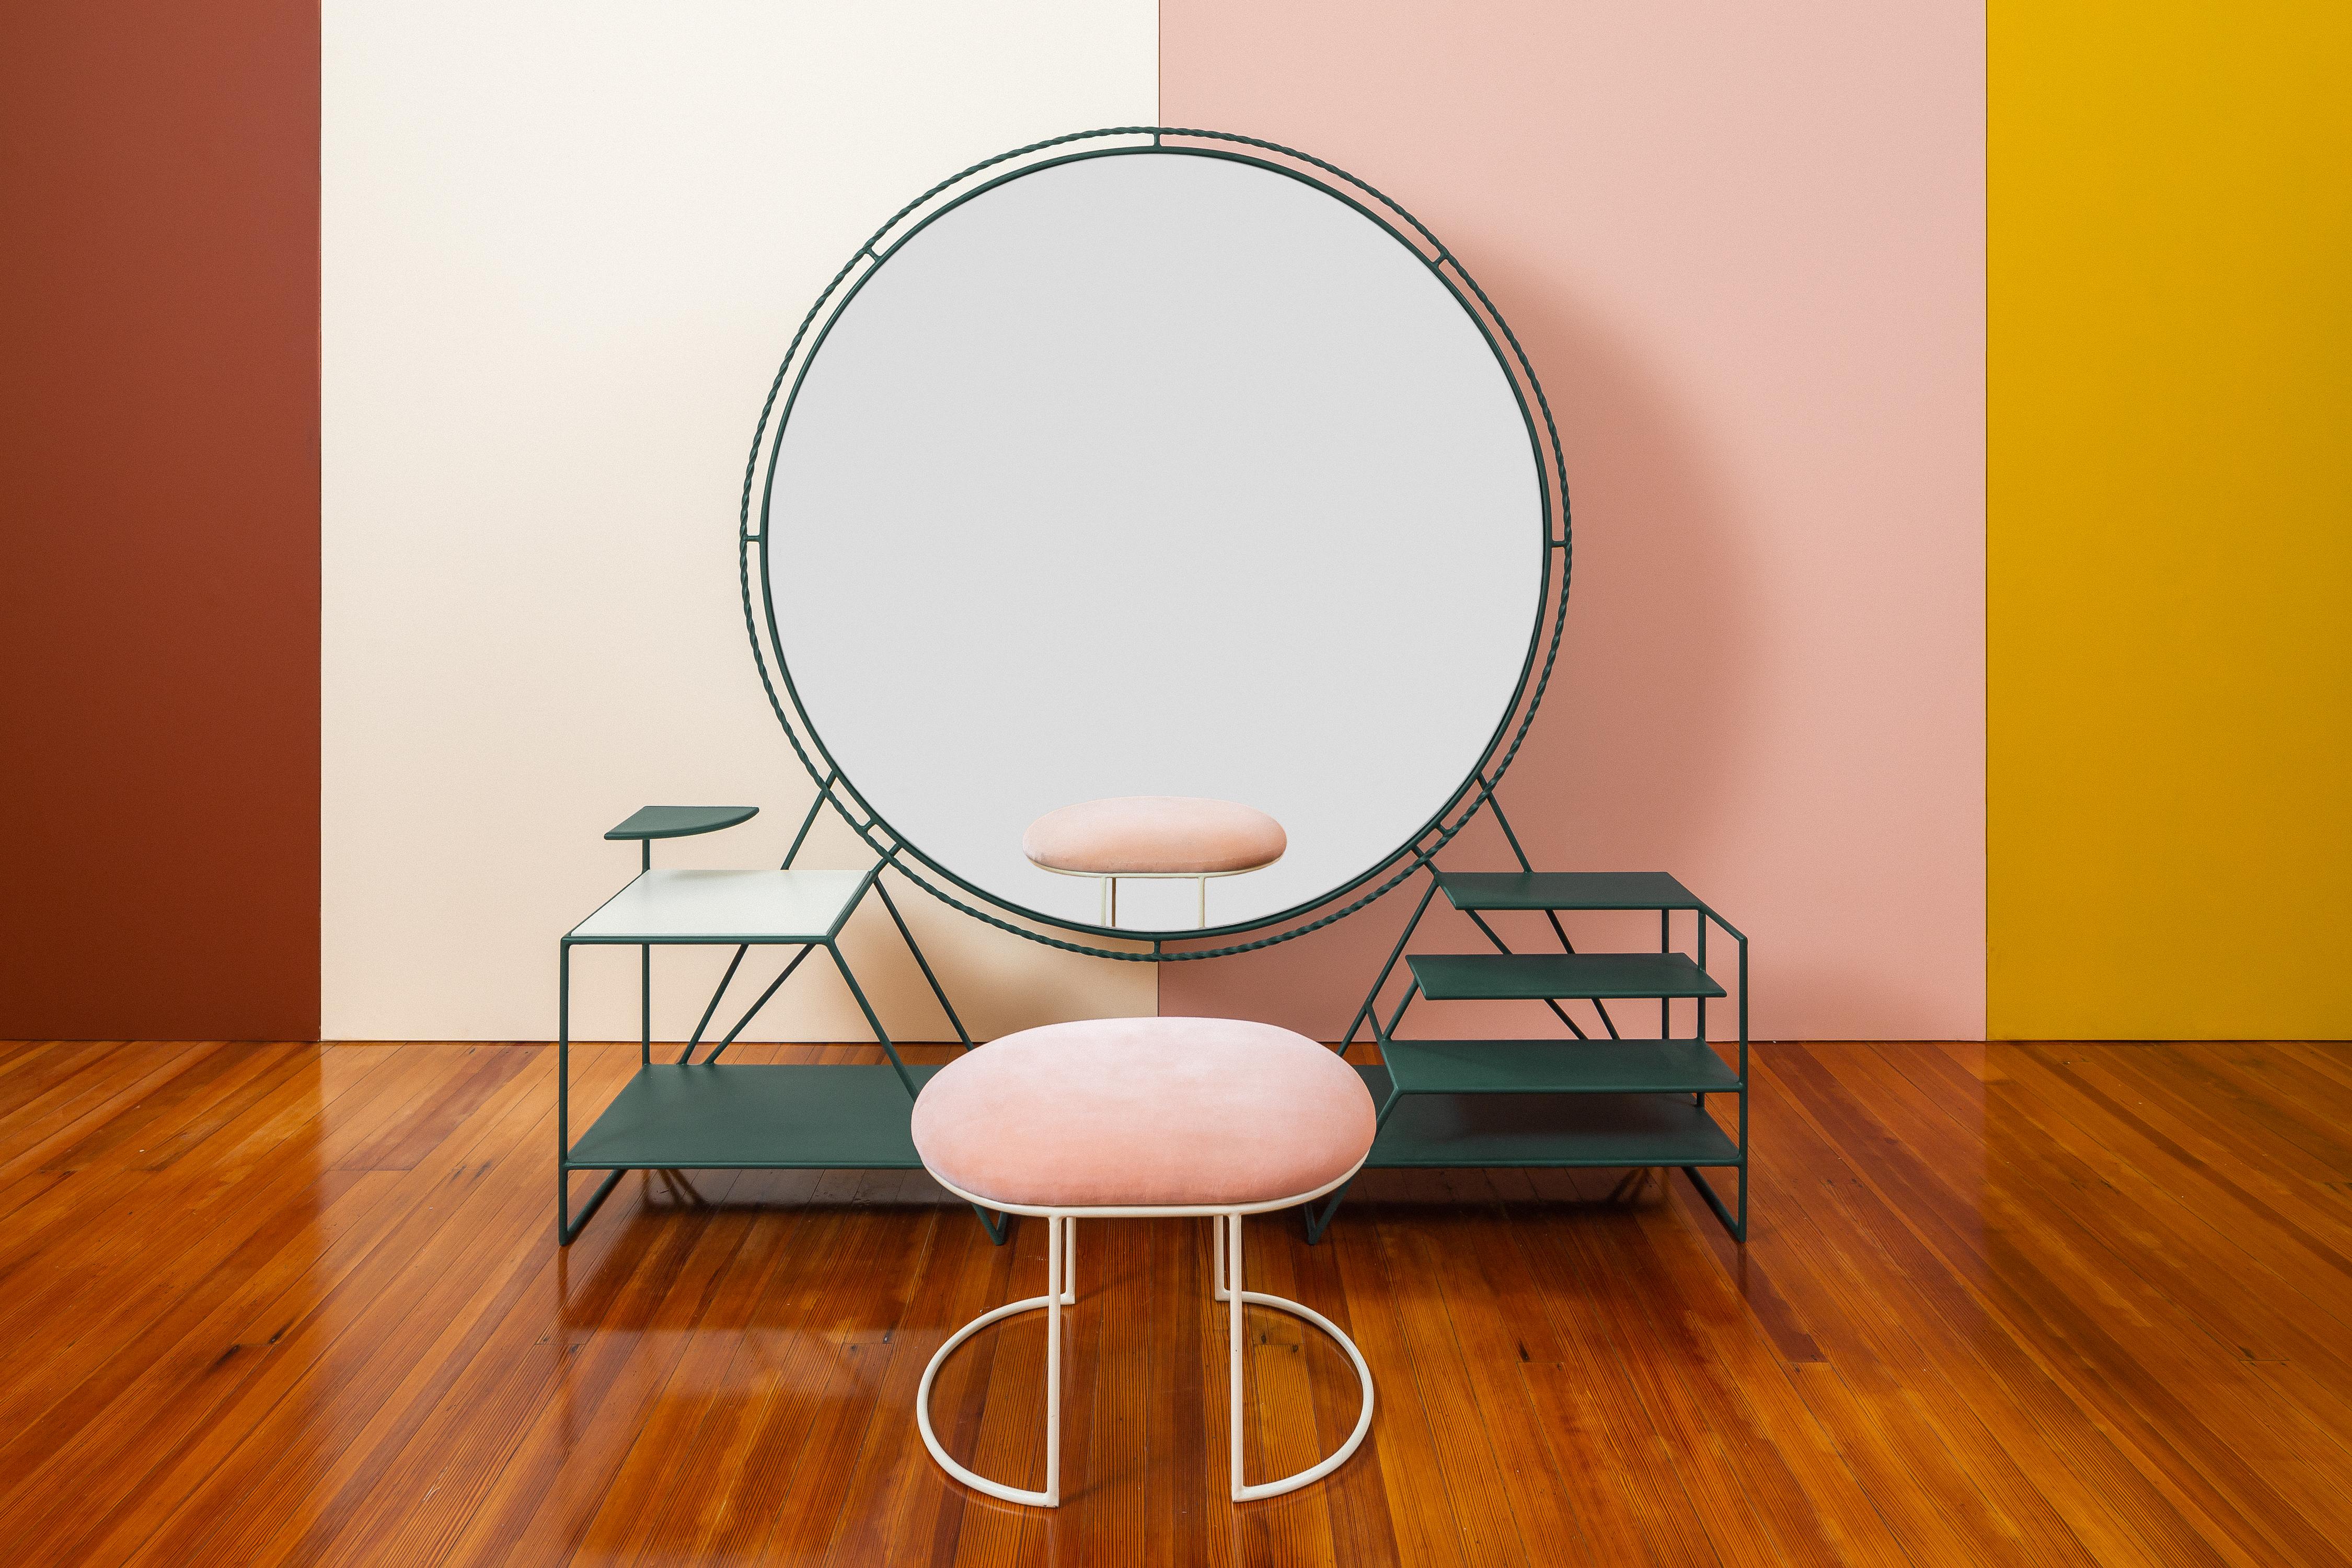 Vanity and ottoman by Sofia Alvarado
Unique Piece
Materials: Metal base, Guayacan wood, mirror glass
Dimensions: 158cm (H) x 160cm (W) x 35cm (D) / 50 x 40cm ottoman
Green, ivory and pink.

FI is an ornamental artist who embodies the creative